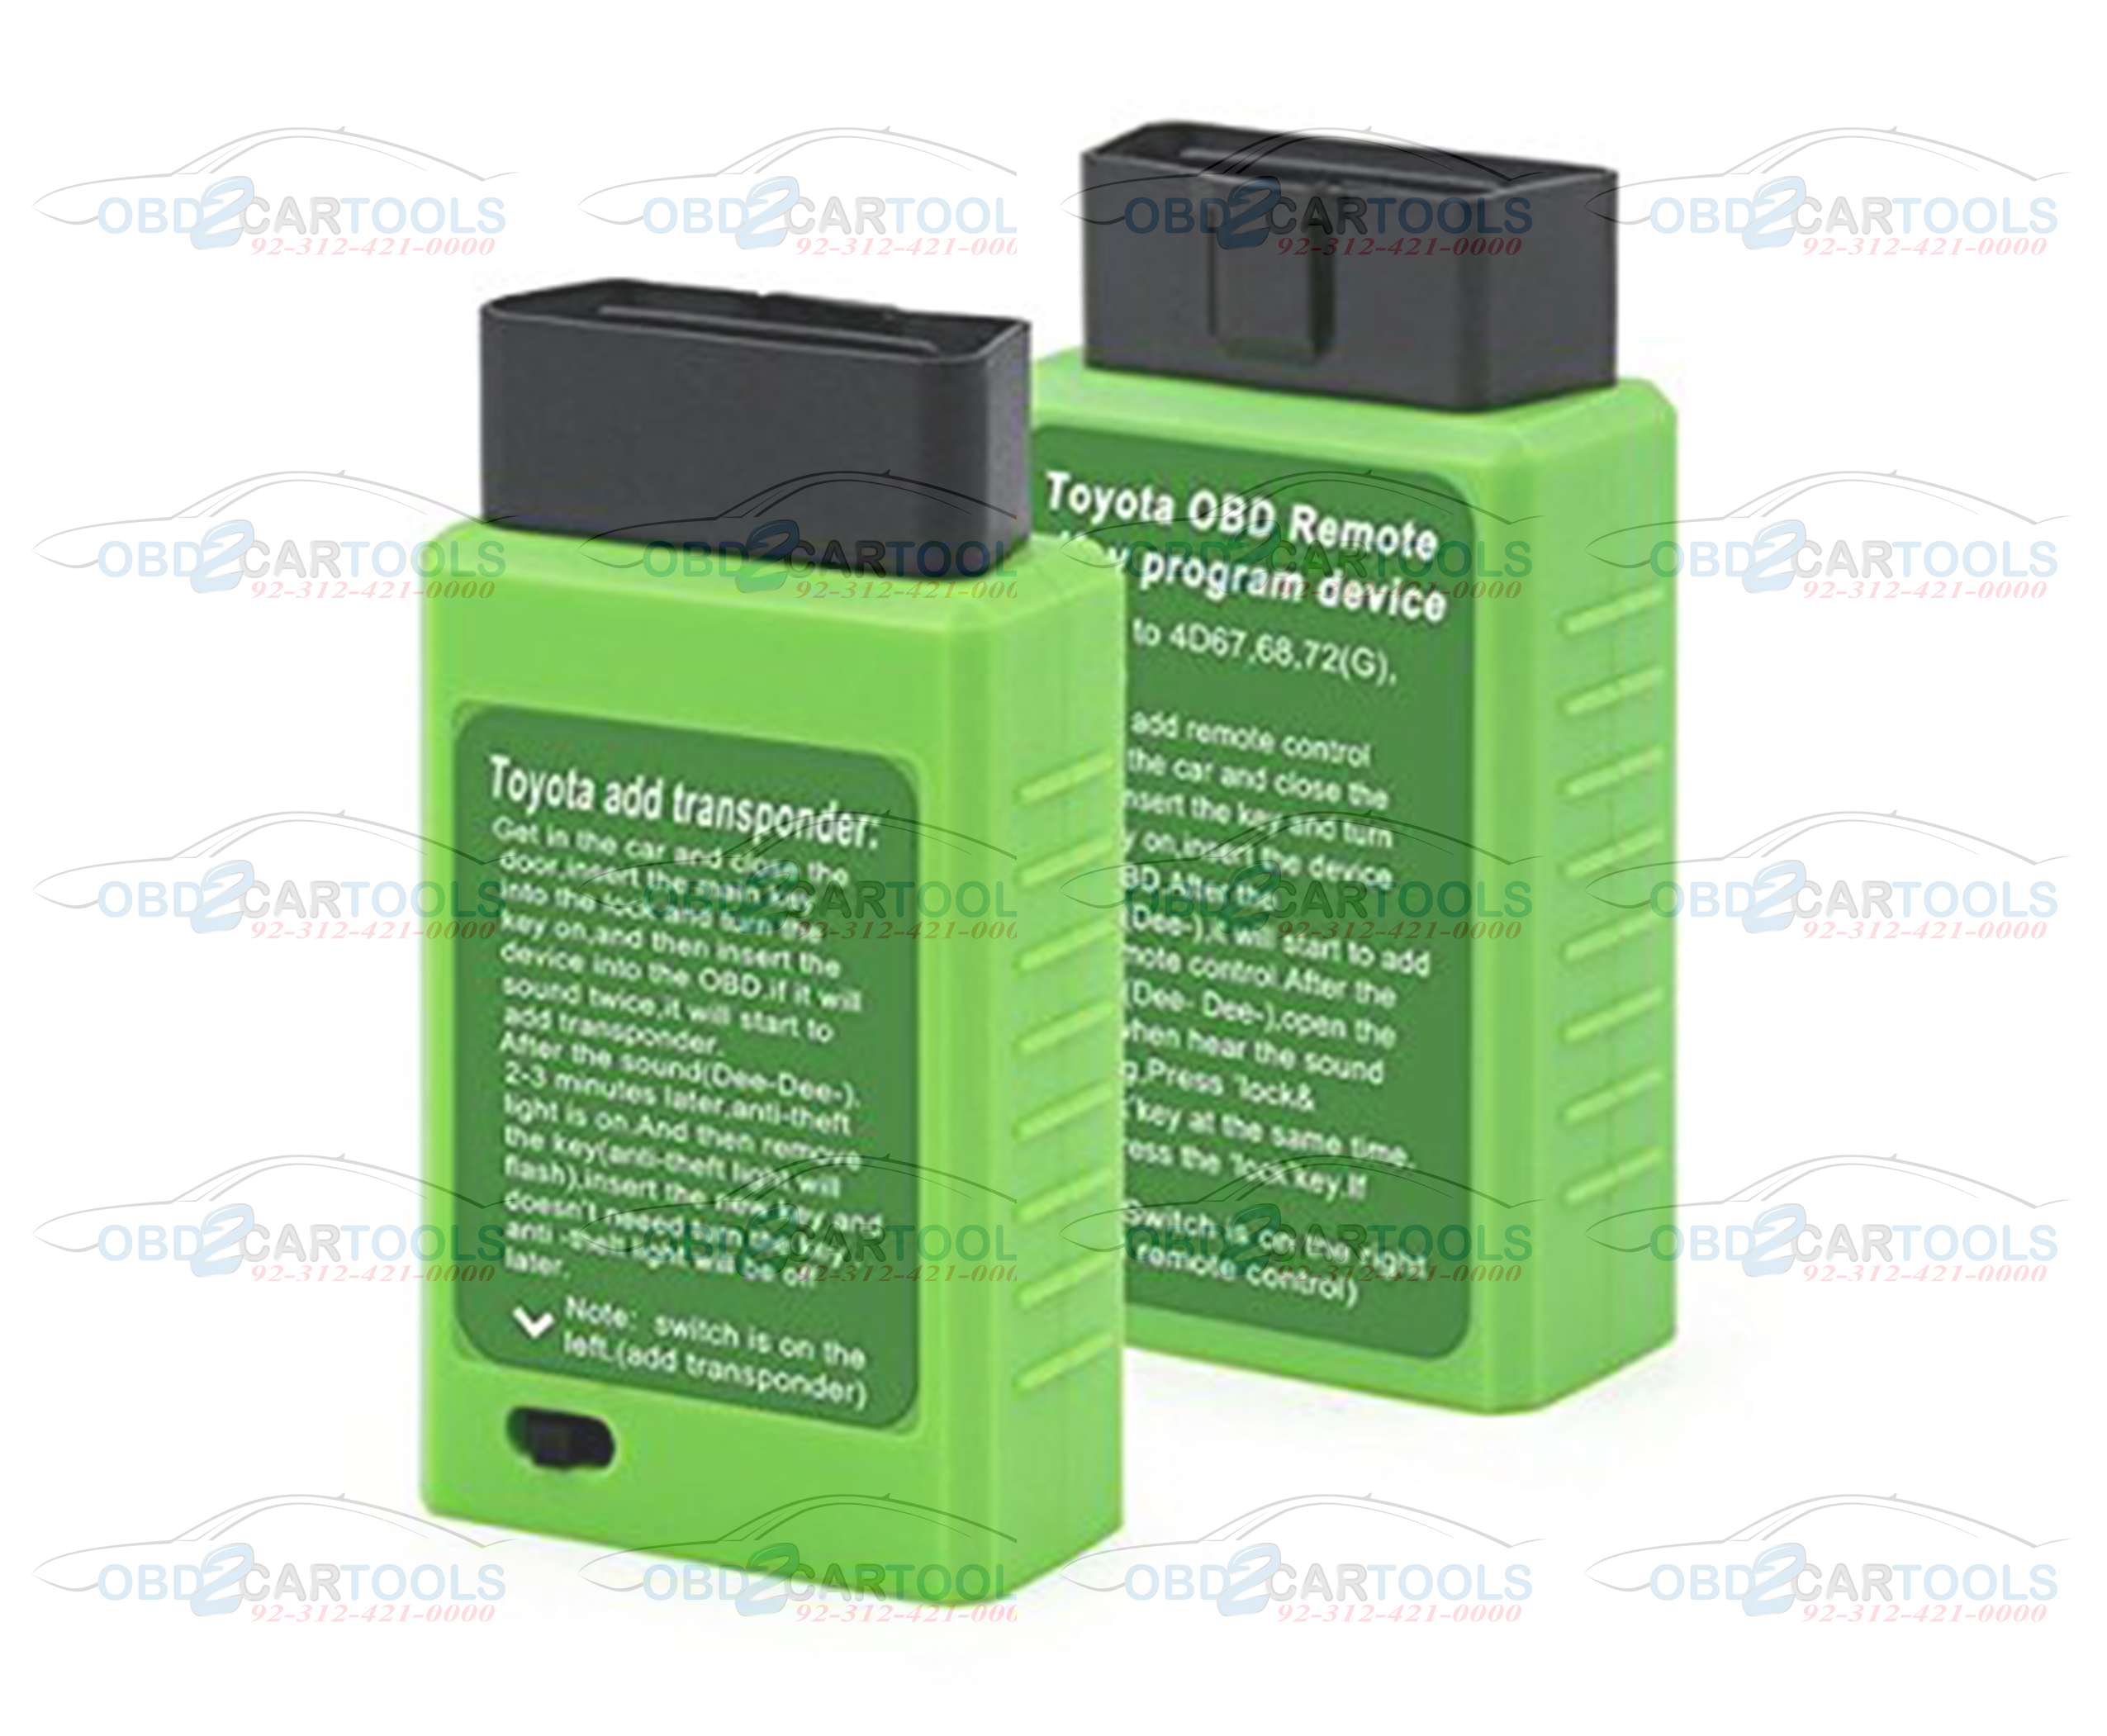 Product image for Toyota G and Toyota H Chip Smart Key maker Programming Via Obd2 Port for Toyota